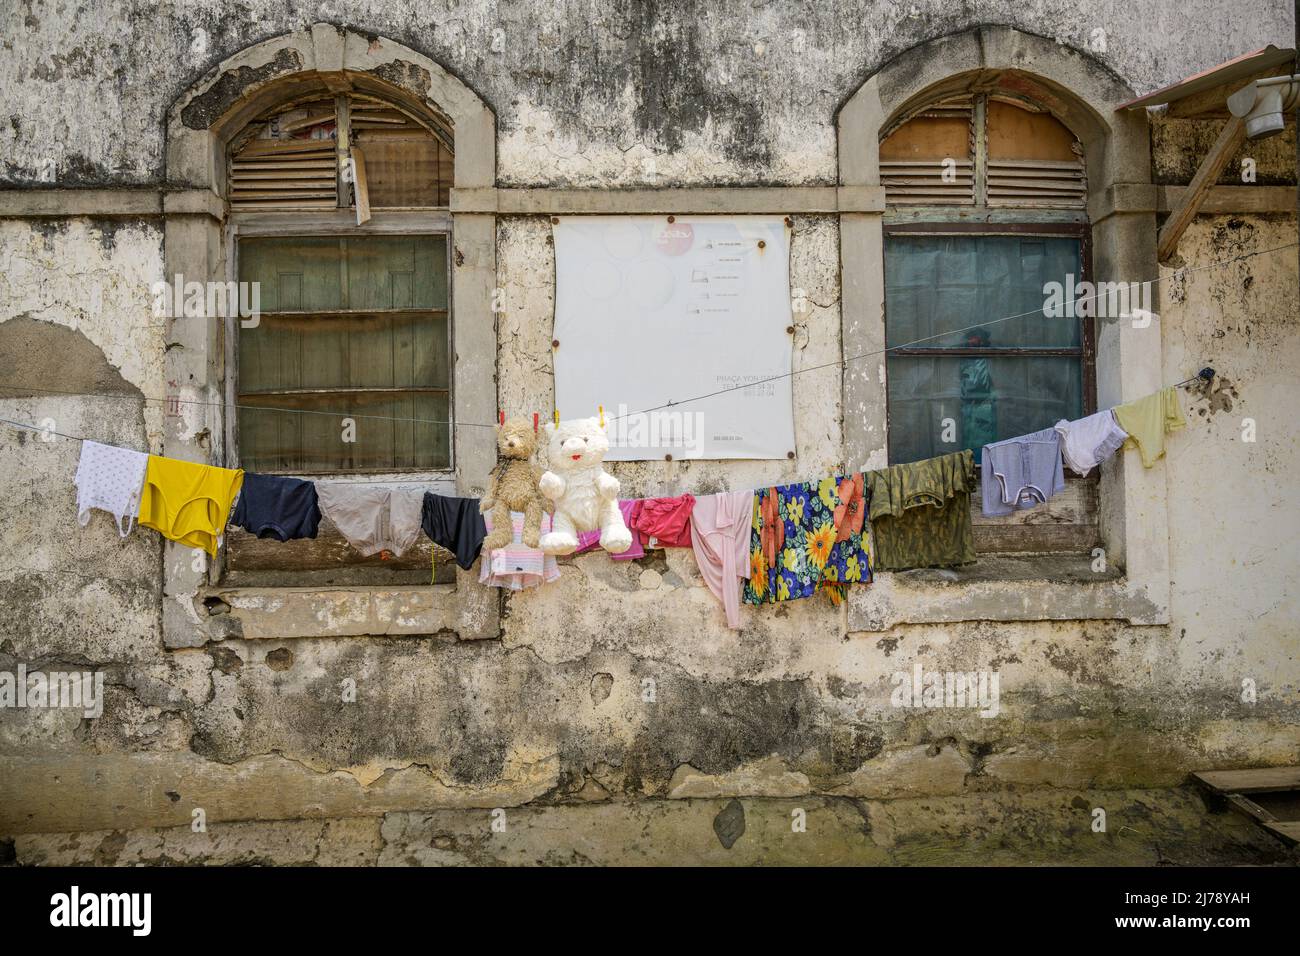 Teddy bears and clothes hung out in the sun to dry in front of a decrepit building of the old colonial plantation known as Roça Agua Ize. Stock Photo